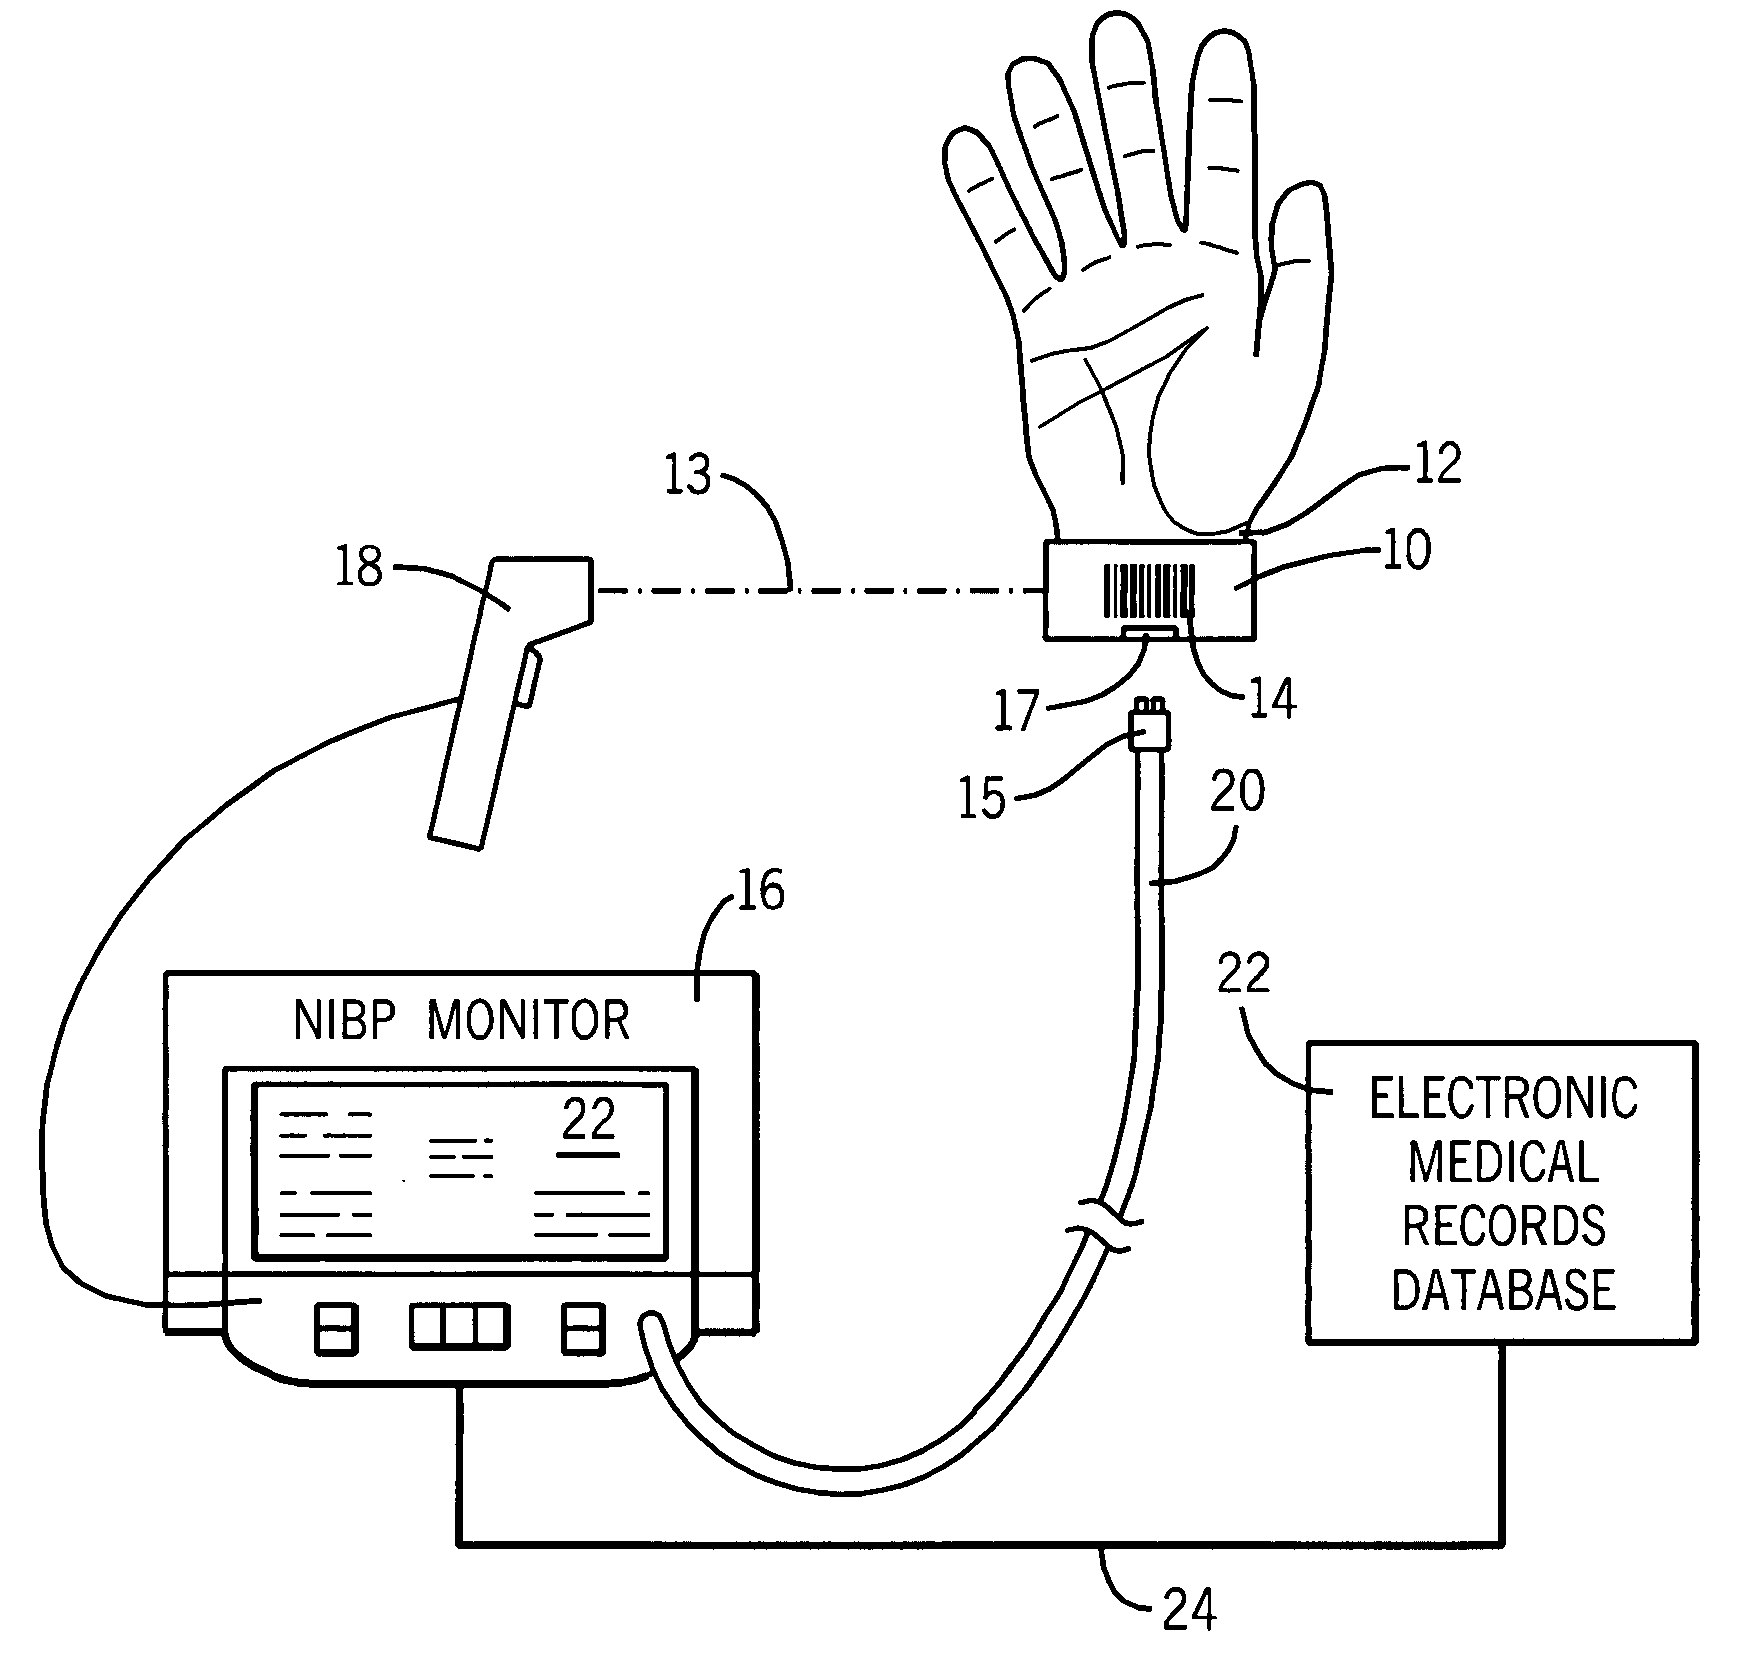 Apparatus, system and method for collecting non-invasive blood pressure readings